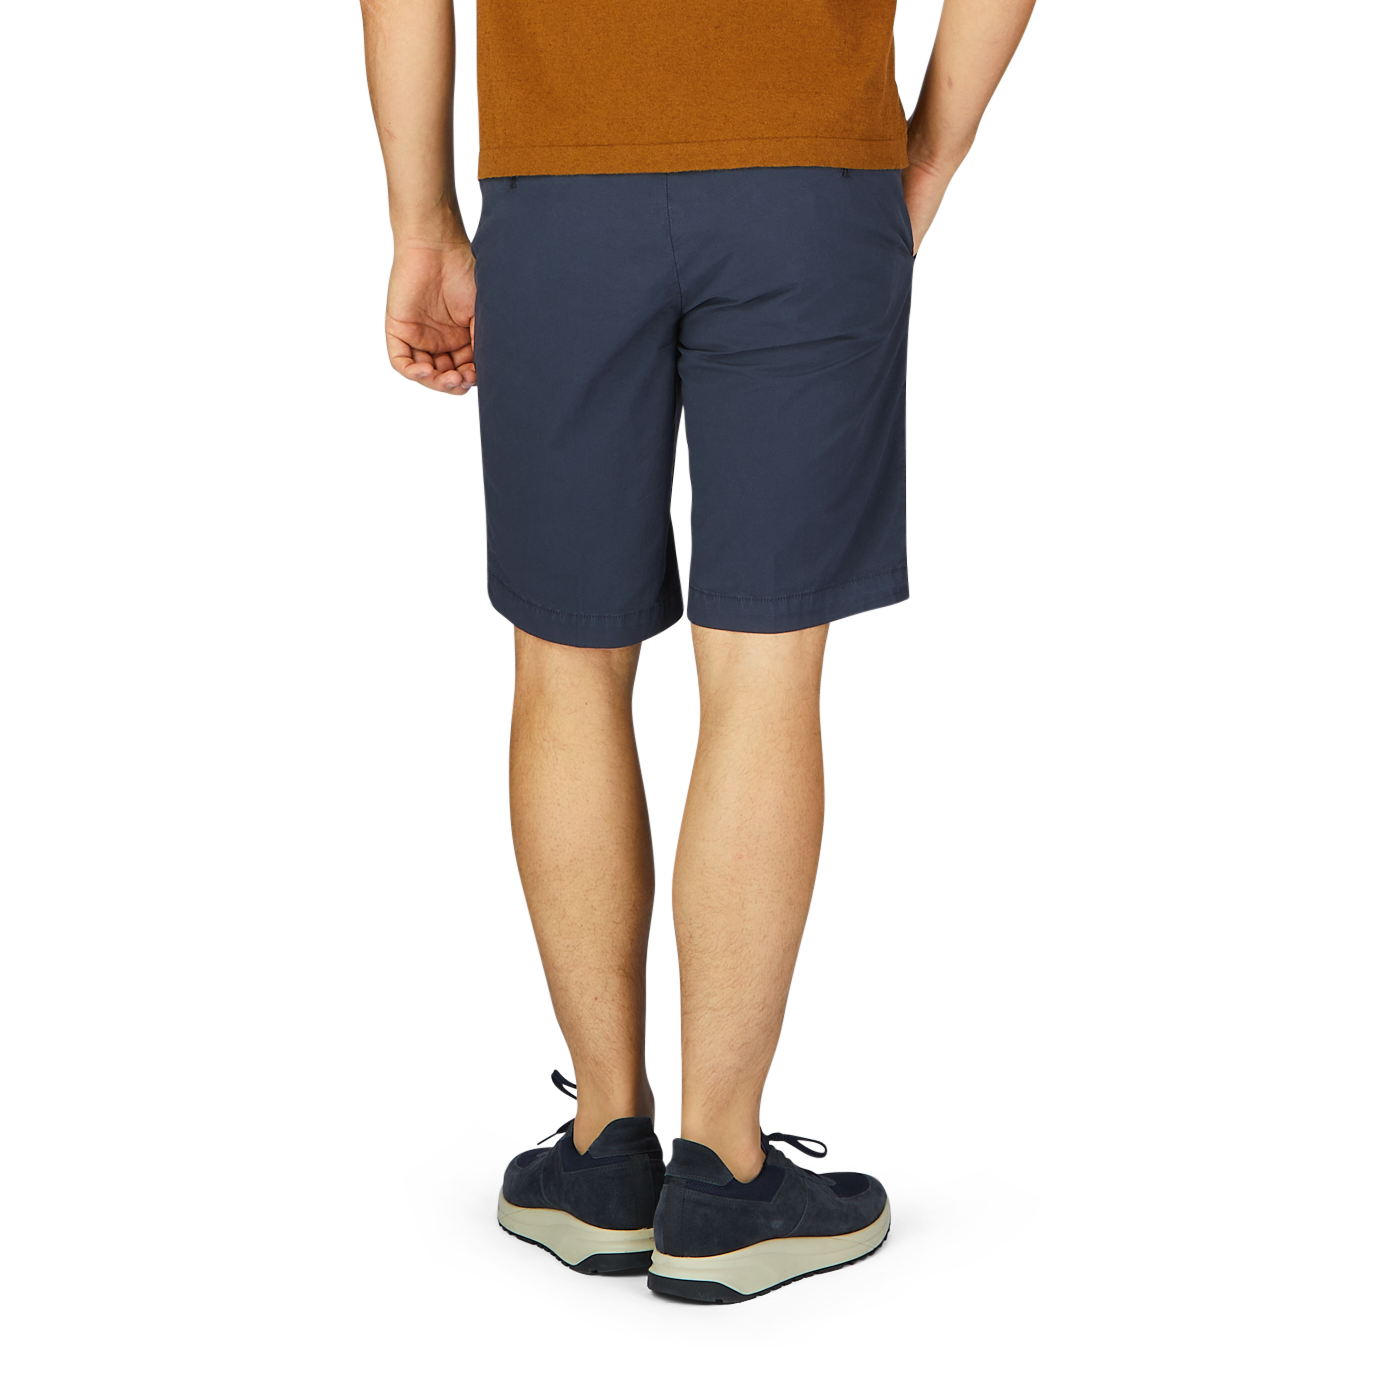 Man standing in Briglia navy blue cotton drawstring Malibu shorts with an adjustable waistband and casual shoes against a neutral background.